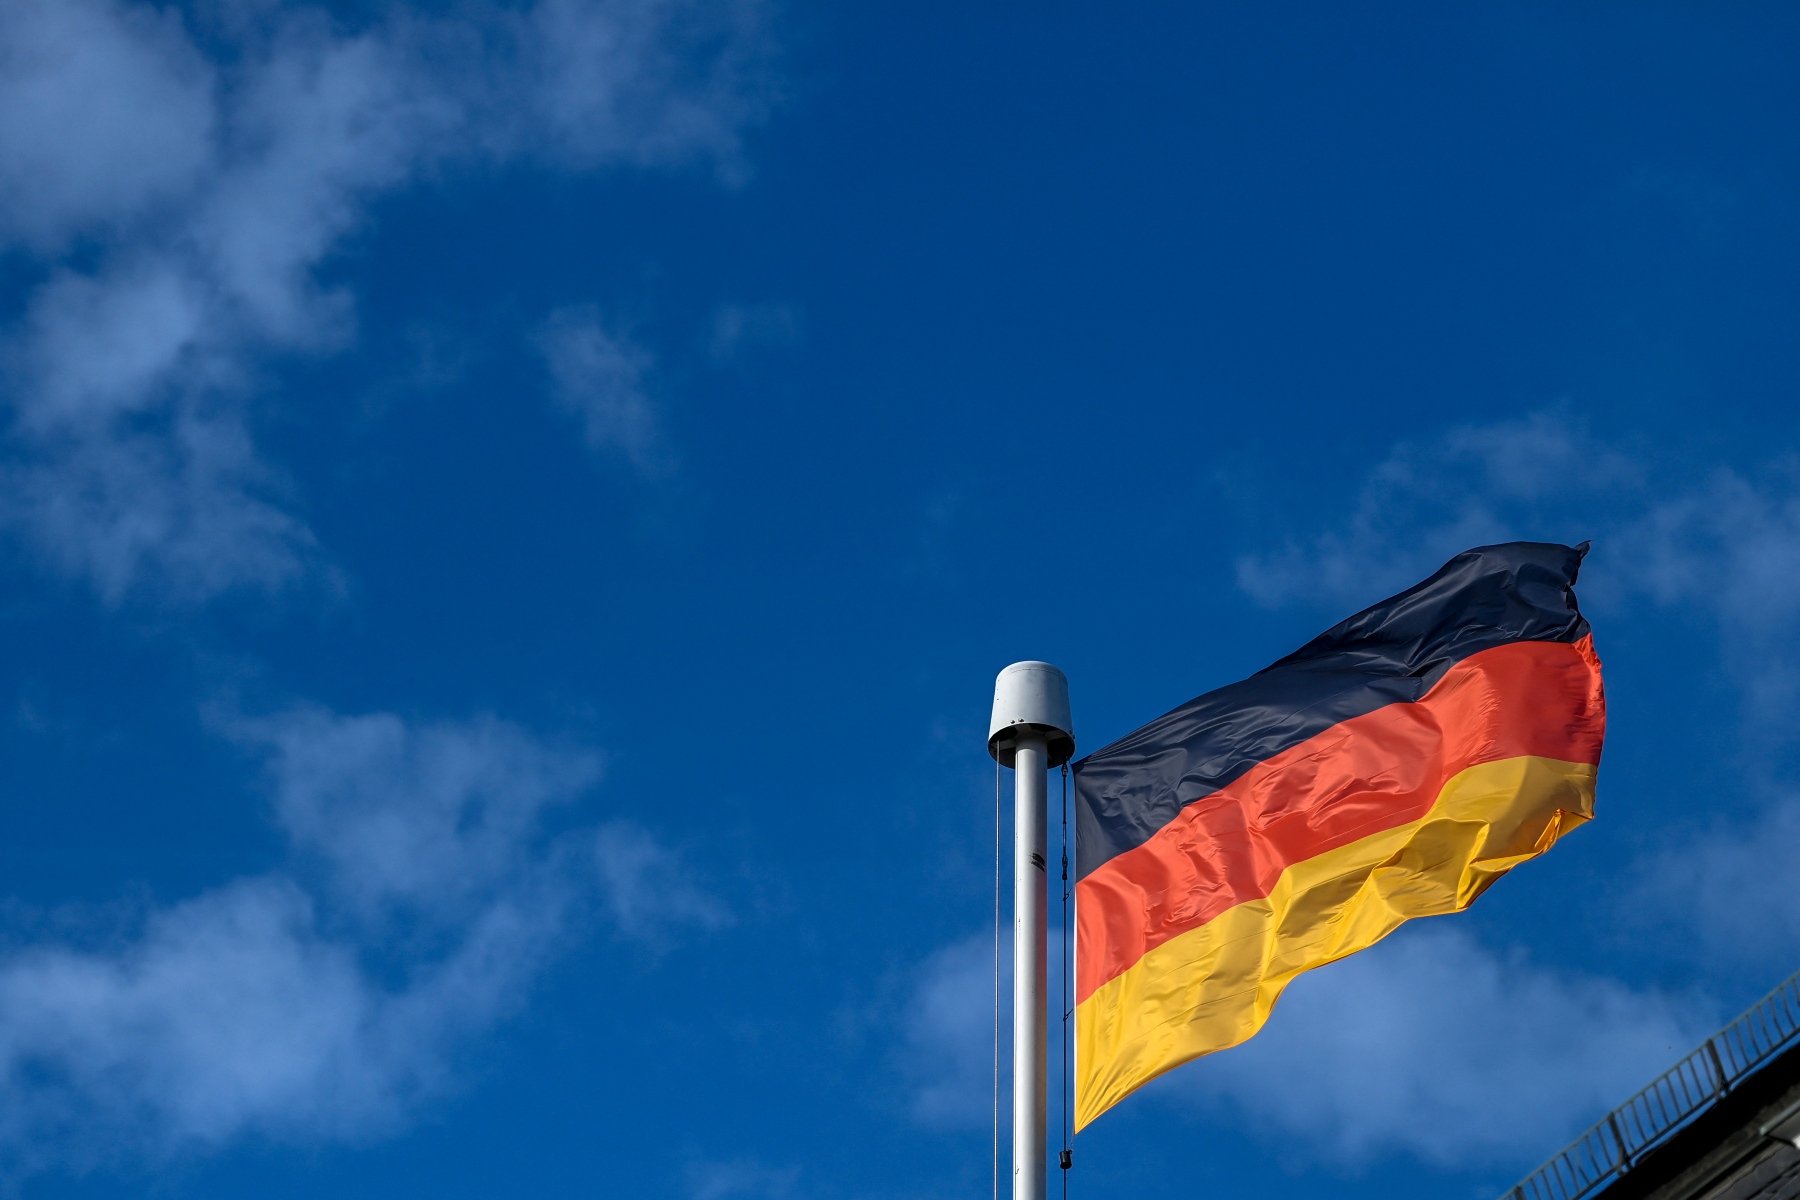 You can pursue doctoral research in Germany with this scholarship